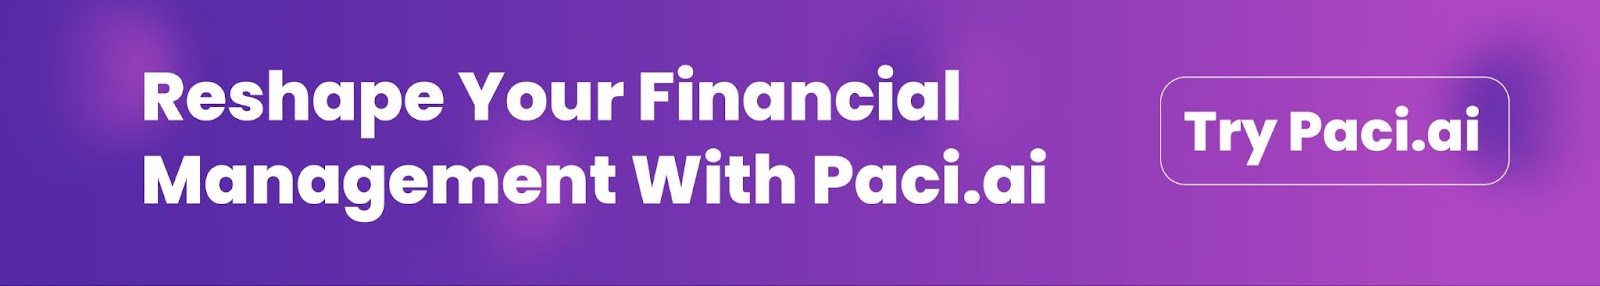 Reshape Your Financial Management With Paci.ai